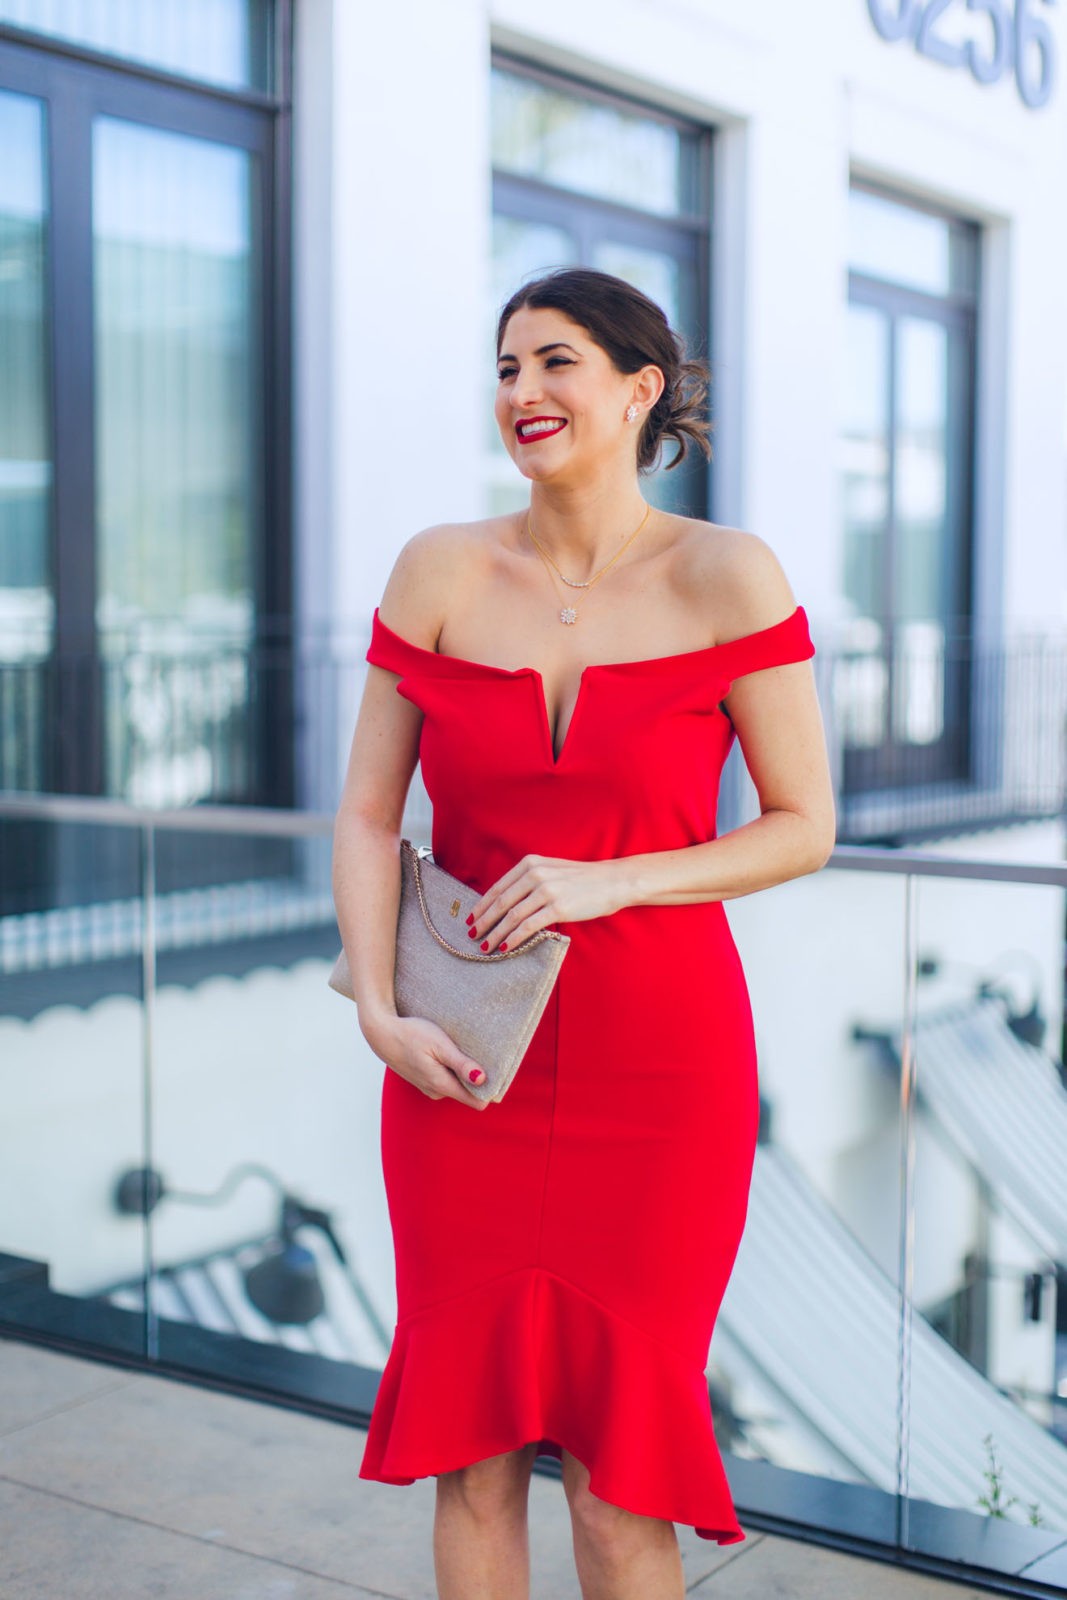 Laura Lily Fashion Travel and Lifestyle Blog, last minute Holiday outfit ideas, Nordstrom Buy Online Pick Up In Store, Missguided Red off the shoulder Dress, Gorjana Jewelry,Last minute gift ideas,